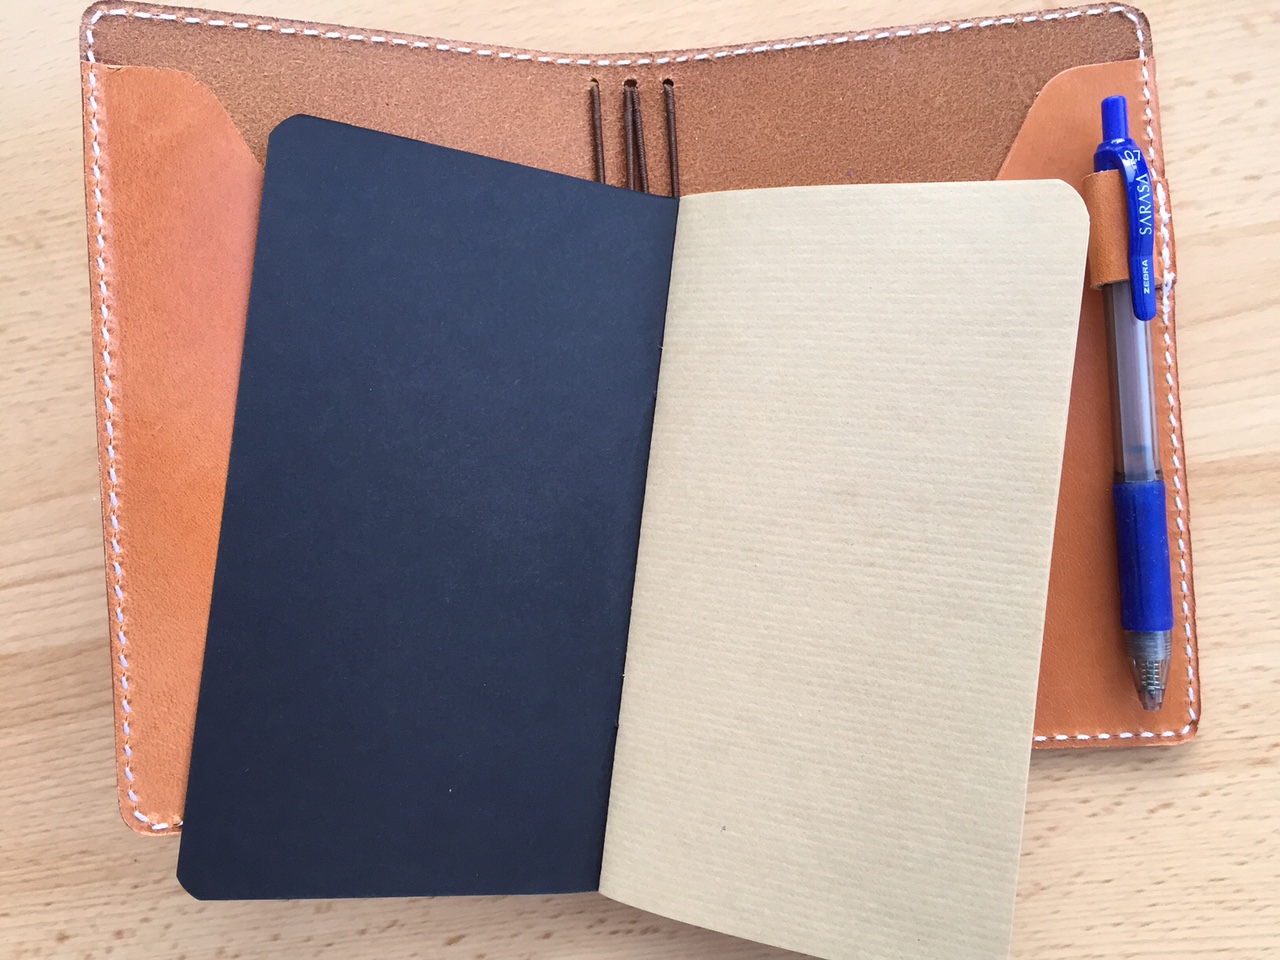 My Life All in One Place: The new personal size traveller's notebook cover